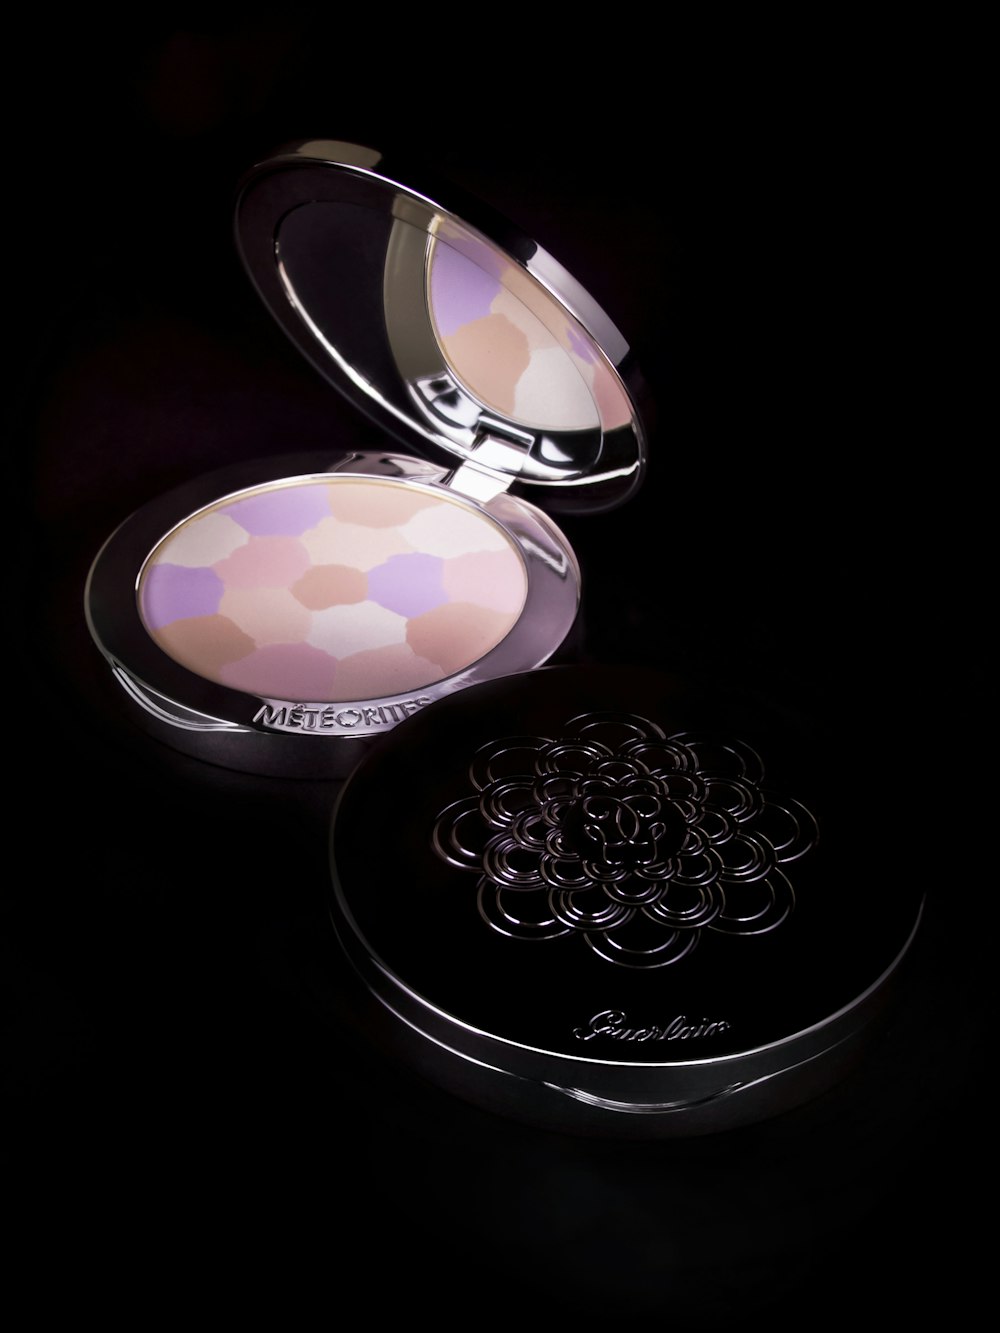 two pressed powders